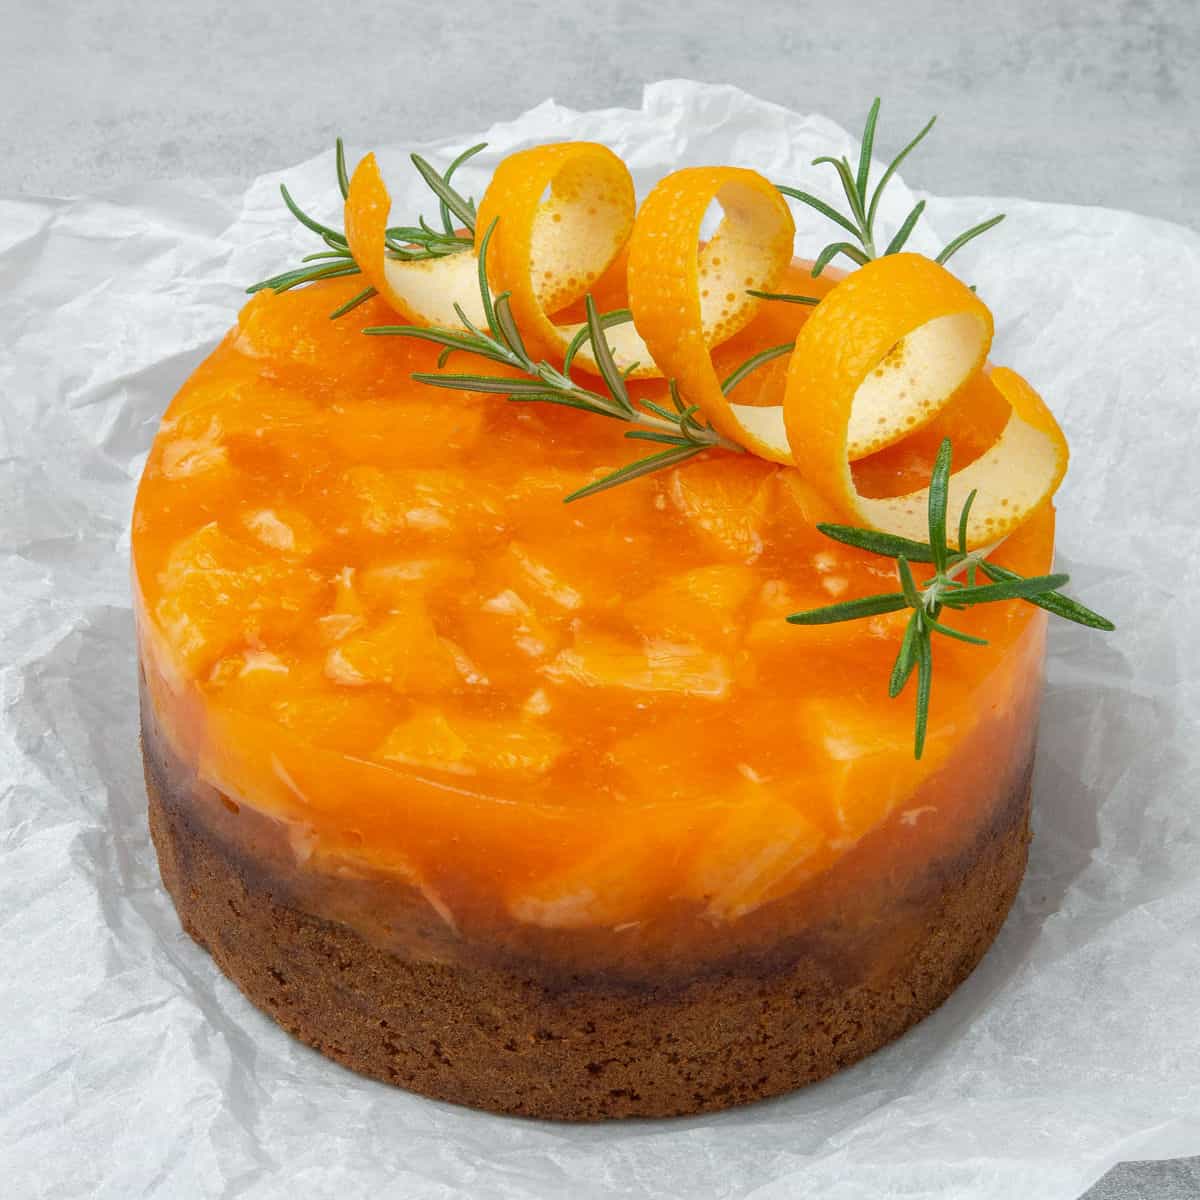 <p>I found the perfect adult-only, luxurious boozy summer cake for you. I love Aperol Spritz, and I love cake. So combining both was a lot of fun. This oil-based <a href="https://www.spatuladesserts.com/boozy-orange-aperol-spritz-cake/">Orange Aperol Spritz Cake</a> won't harden in the fridge and is super moist and fluffy, and the orange Aperol topping makes it taste exactly like the cocktail but in cake form. </p> <p><strong>Go to the recipe: <a href="https://www.spatuladesserts.com/boozy-orange-aperol-spritz-cake/">Boozy Orange Aperol Spritz Cake</a></strong></p>